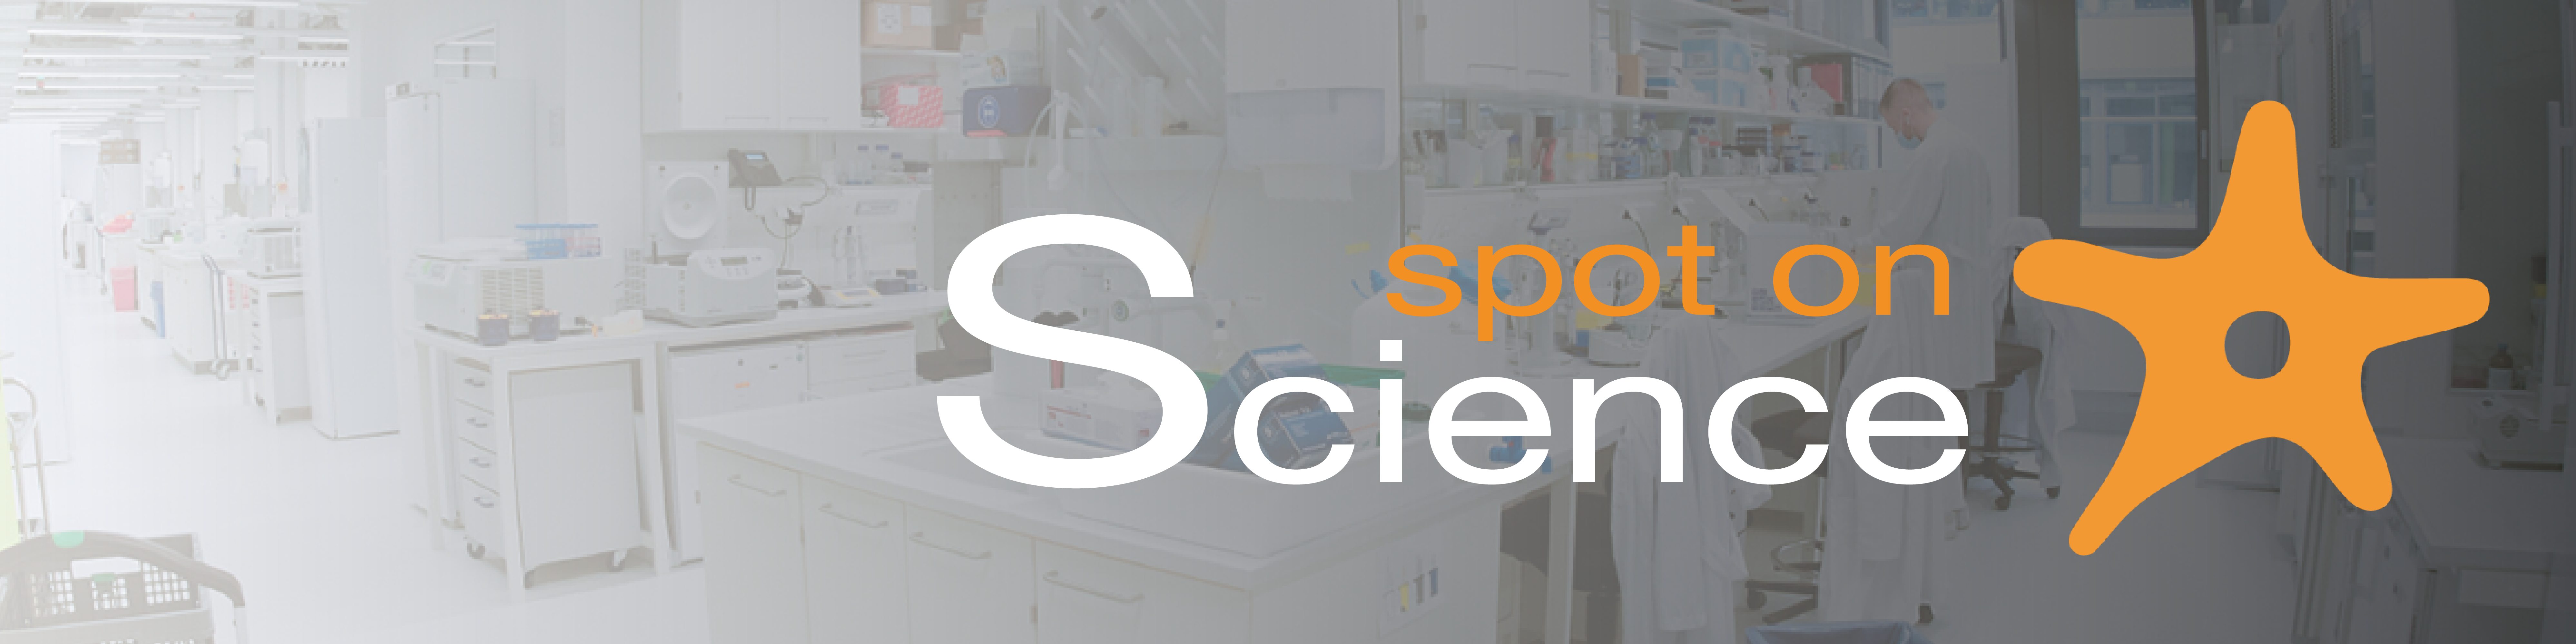 Spot on Science banner